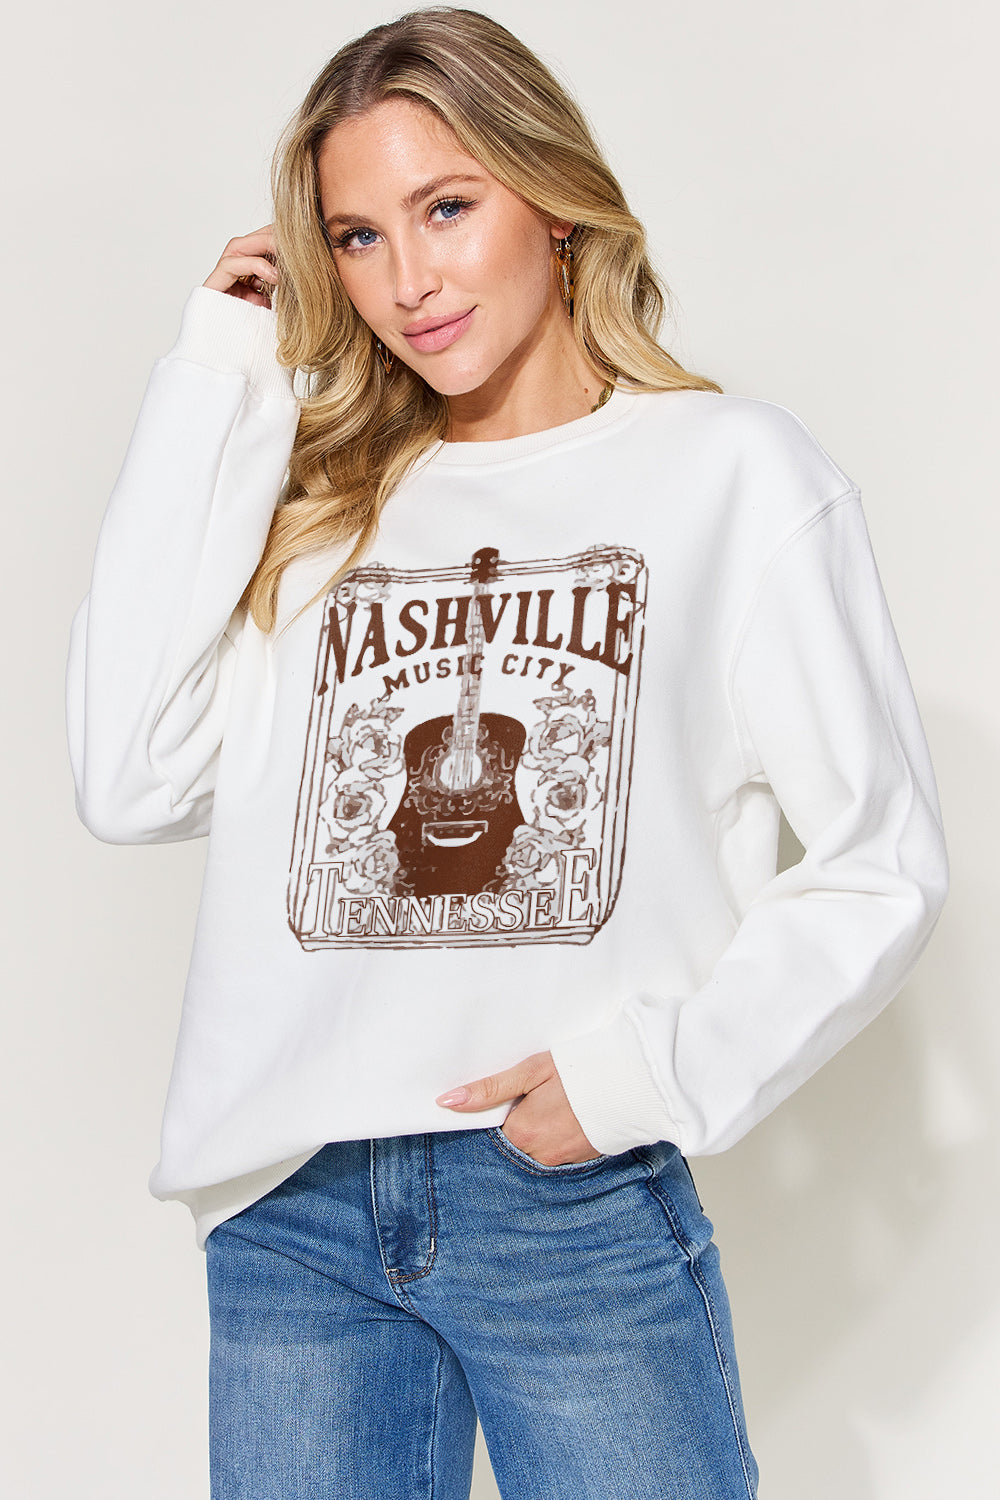 Simply Love Full Size Graphic Long Sleeve Sweatshirt  | KIKI COUTURE